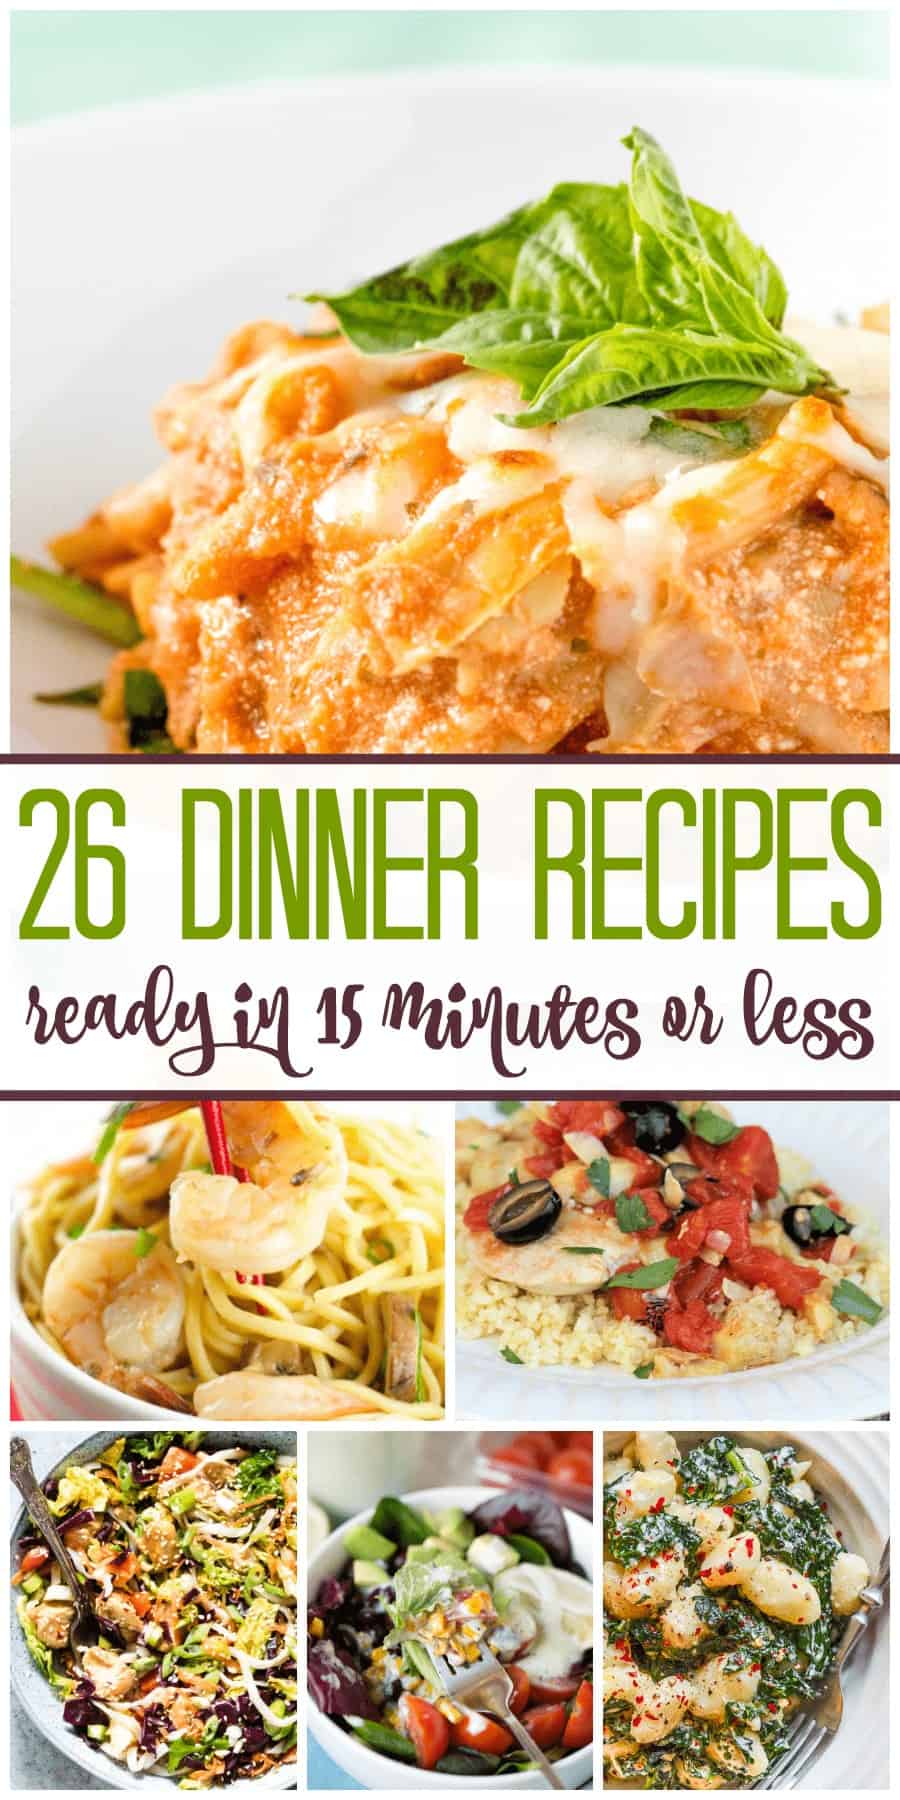 Need some quick recipes that can be made in 15 minutes? Here are over 25 new recipes for you to try out with your family so you can get meals out of the way and get on with your evenings activities. #food #meals #budget #frugalmeals #supper #dinner #dinnerideas #dinnerrecipes #recipes #recipeideas 